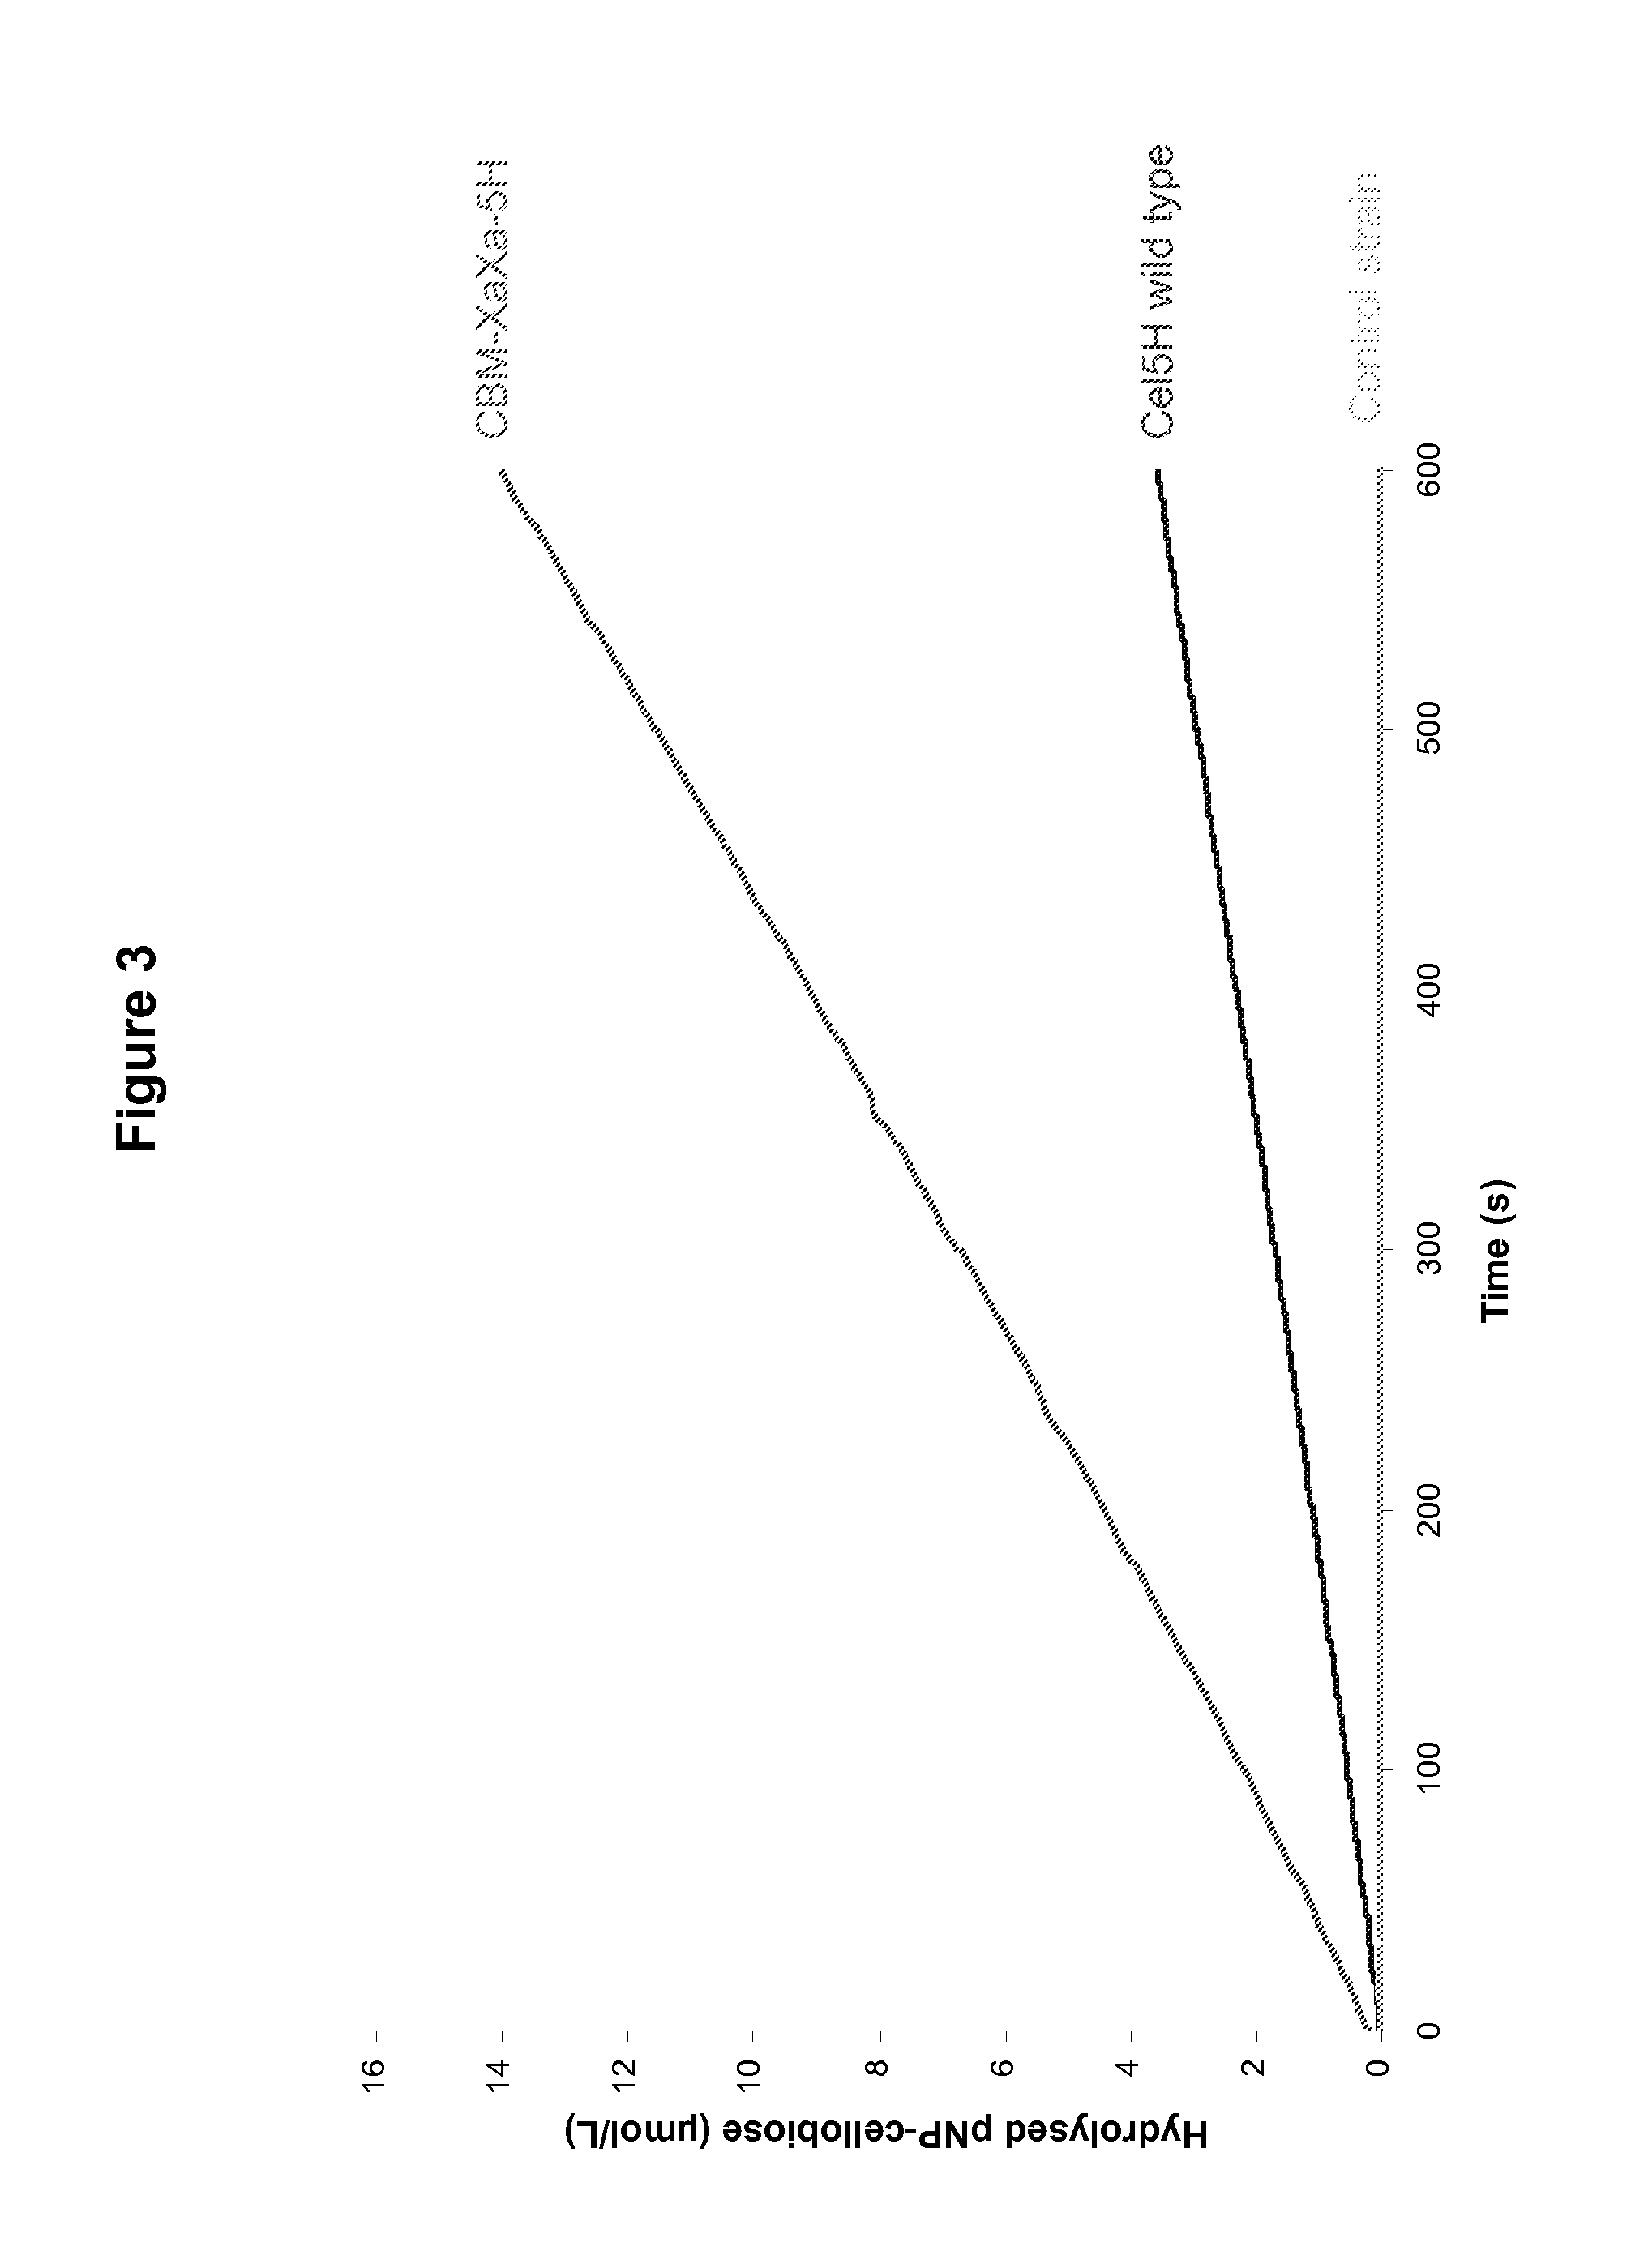 Constructs and Methods for the Production and Secretion of Polypeptides